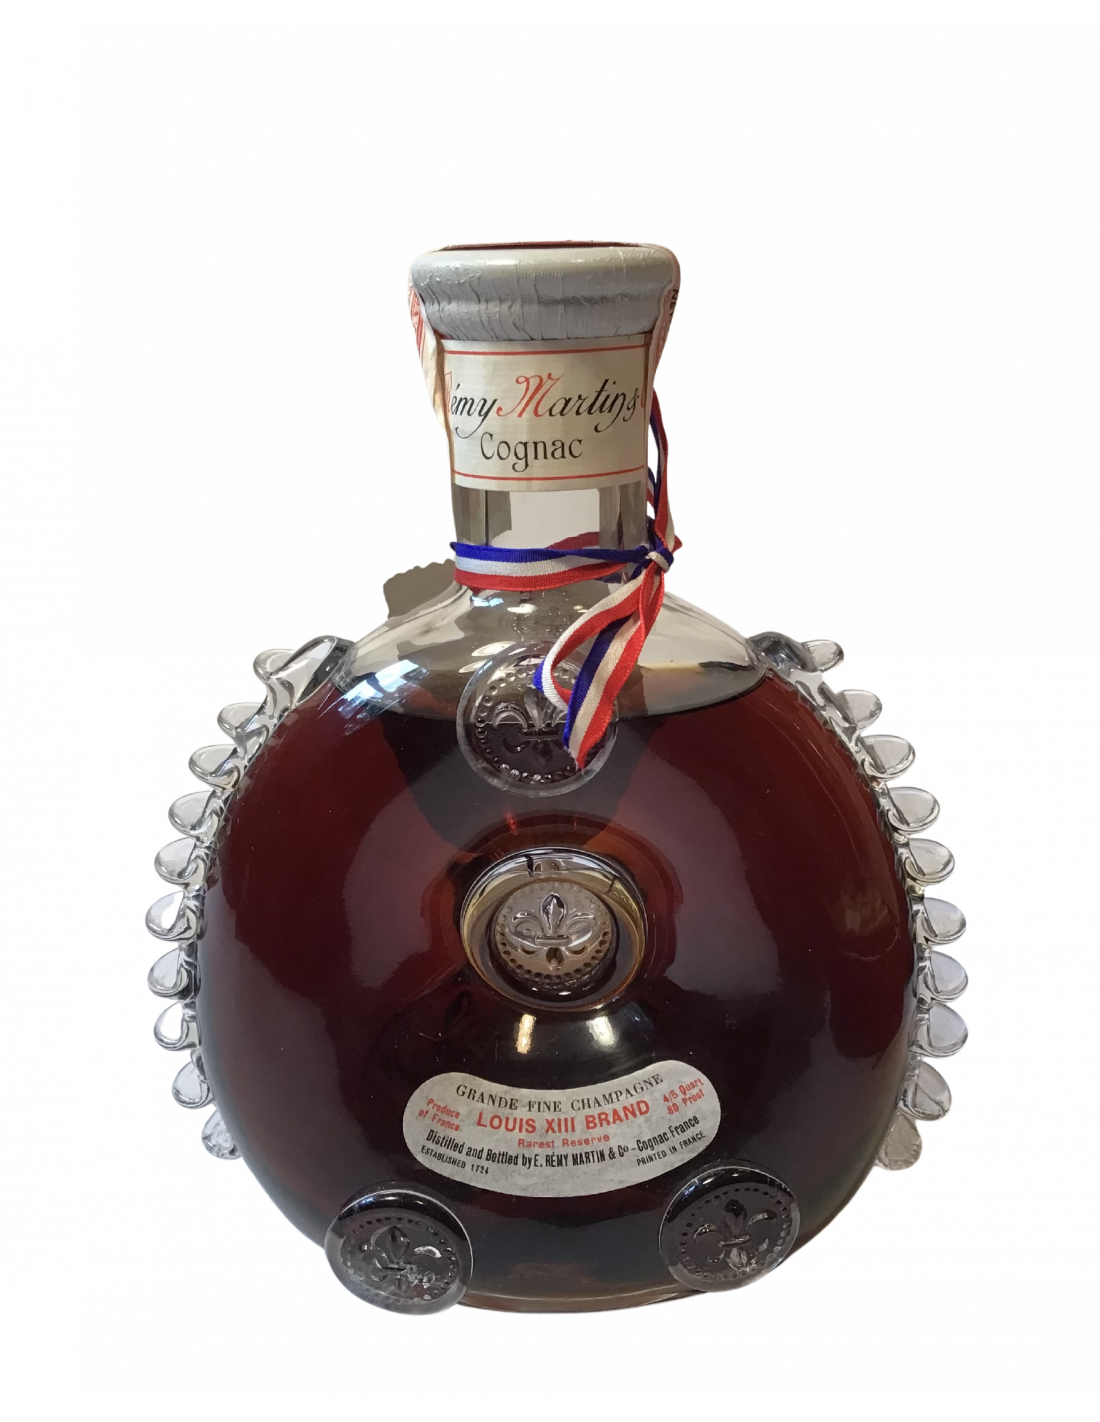 Sold at Auction: An empty Louis XIII Remy Martin Grand Champagne